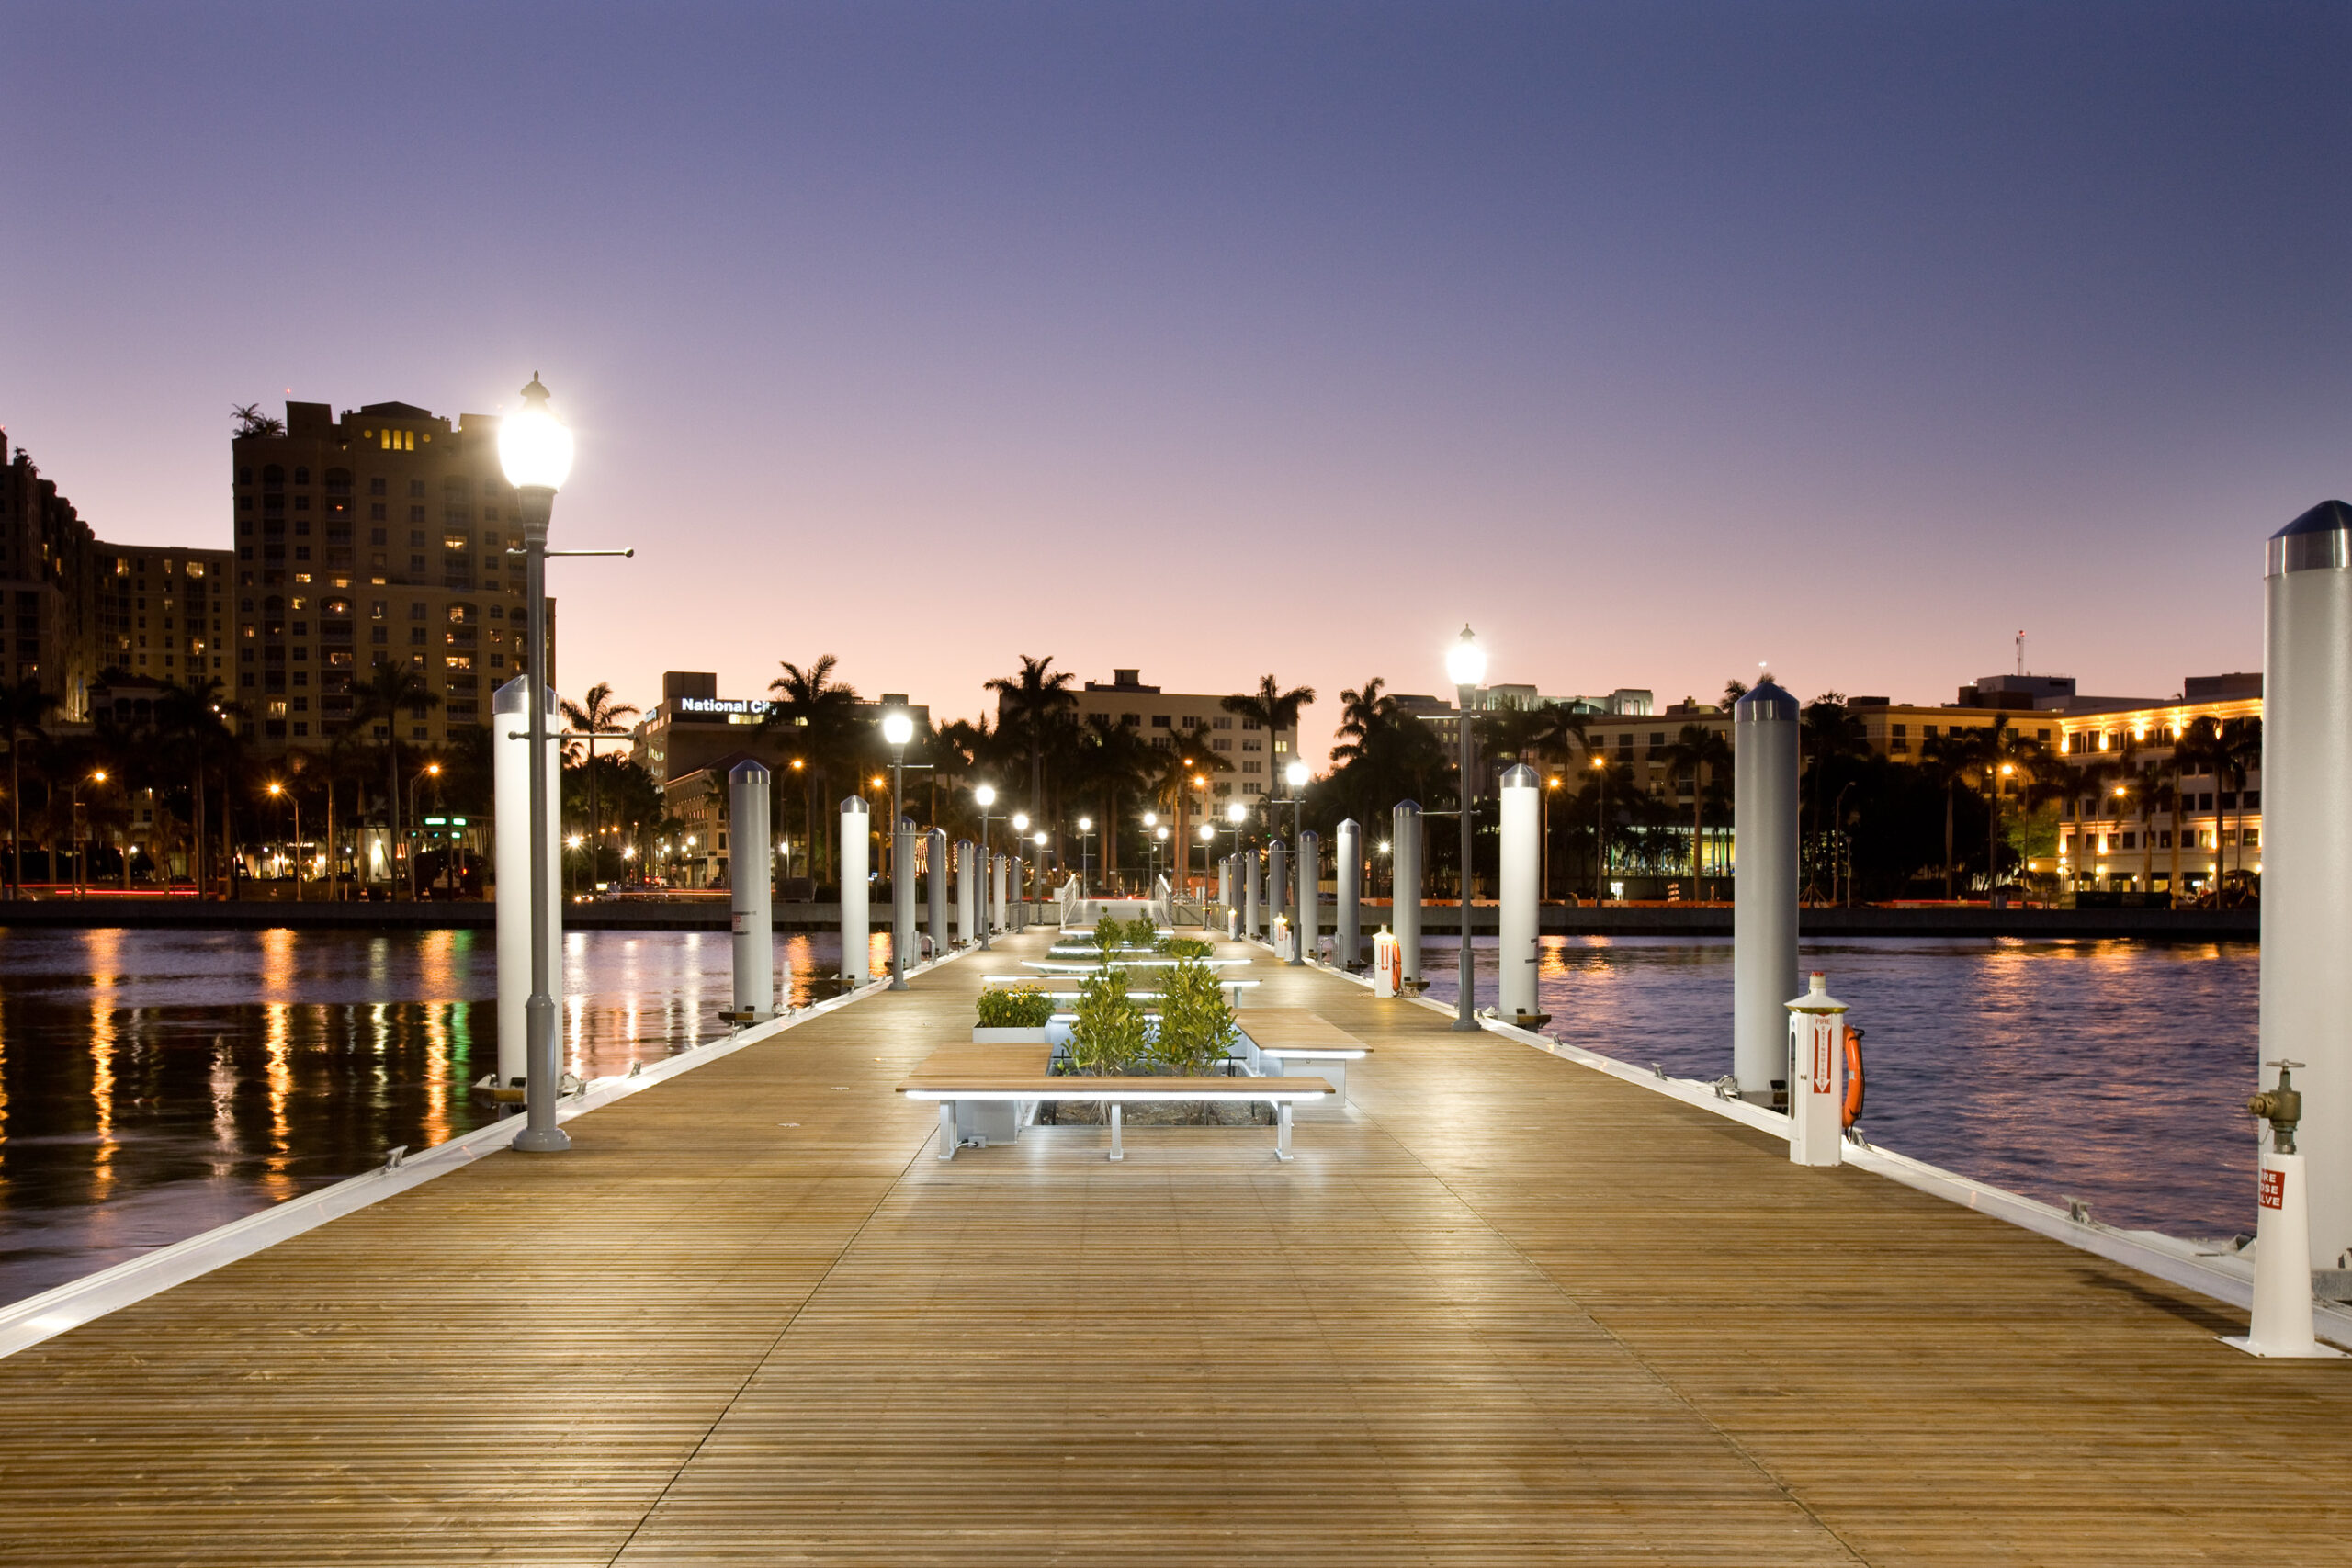 Public pier with wood decking, benches and custom landscaping features in Florida